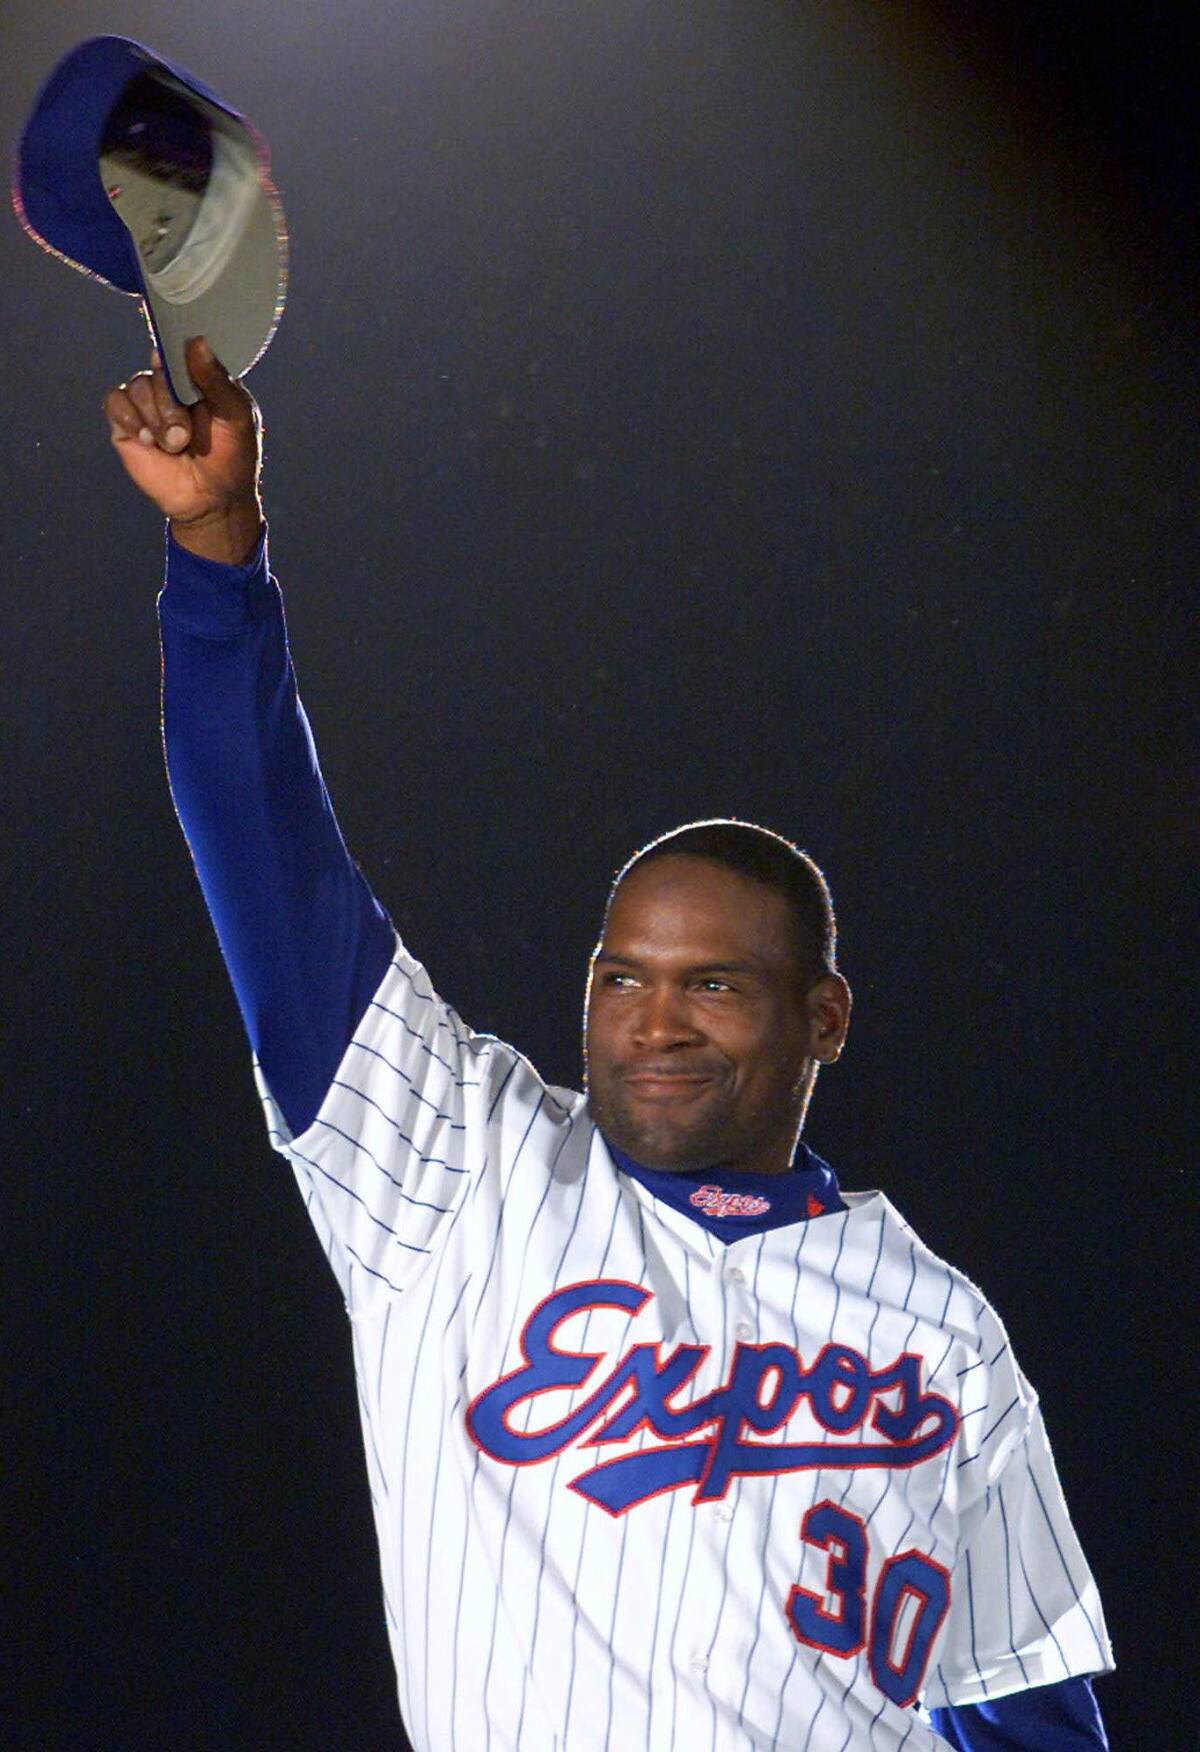 Former Montreal Expo Tim Raines has fingers crossed for Hall of Fame